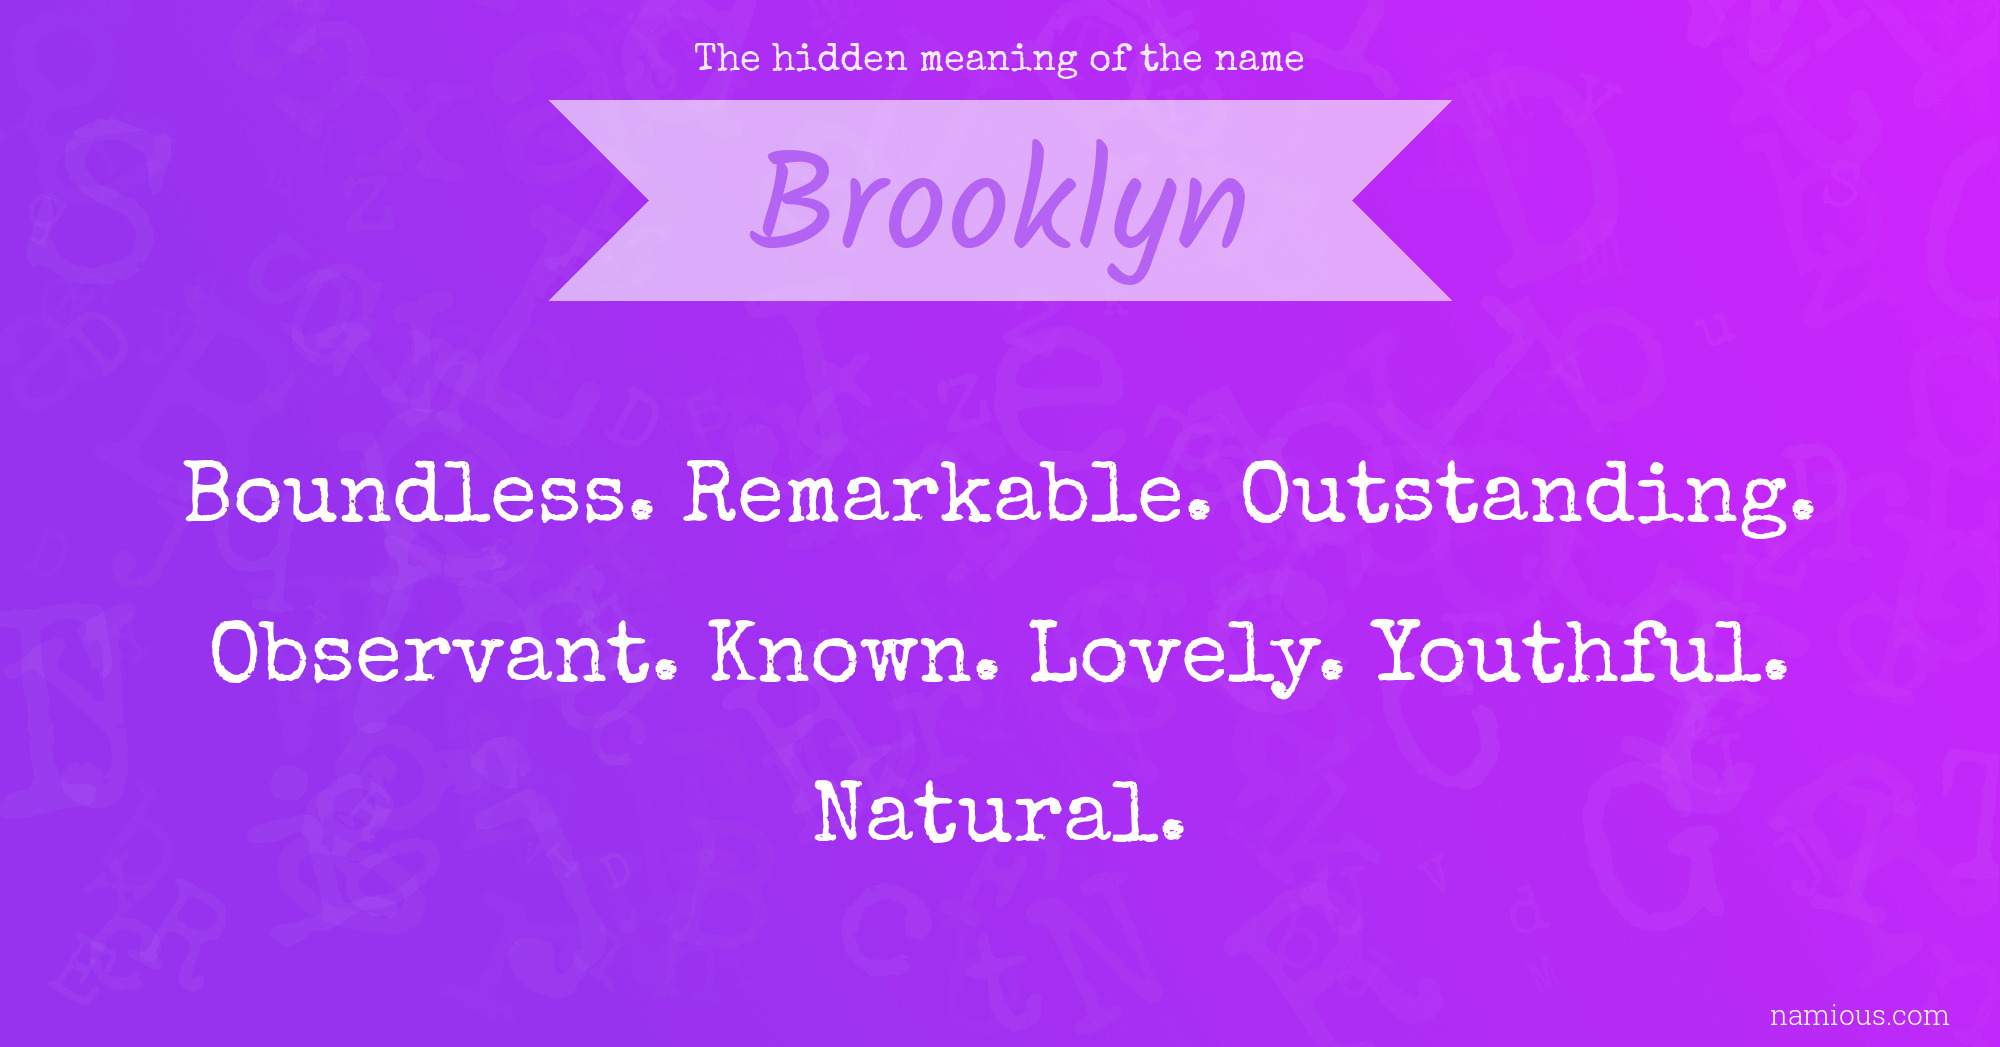 The hidden meaning of the name Brooklyn